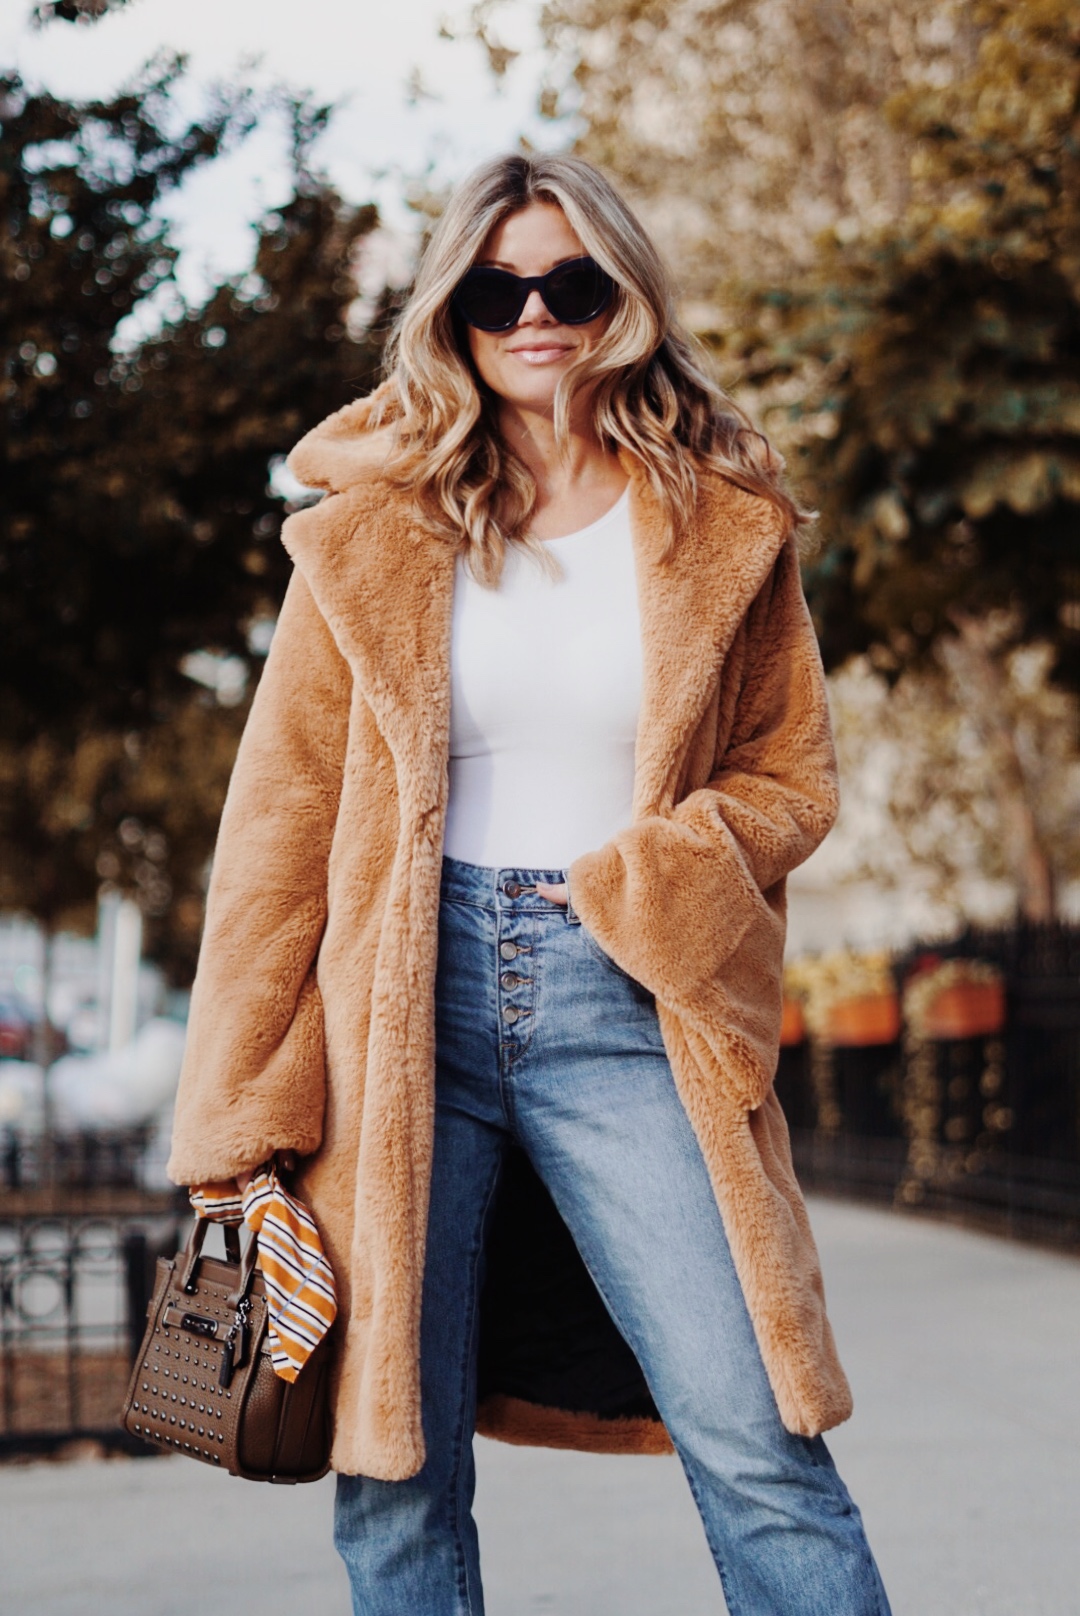 Teddy Bear Coat Is All You Need This Fall… – Just Like Gillian